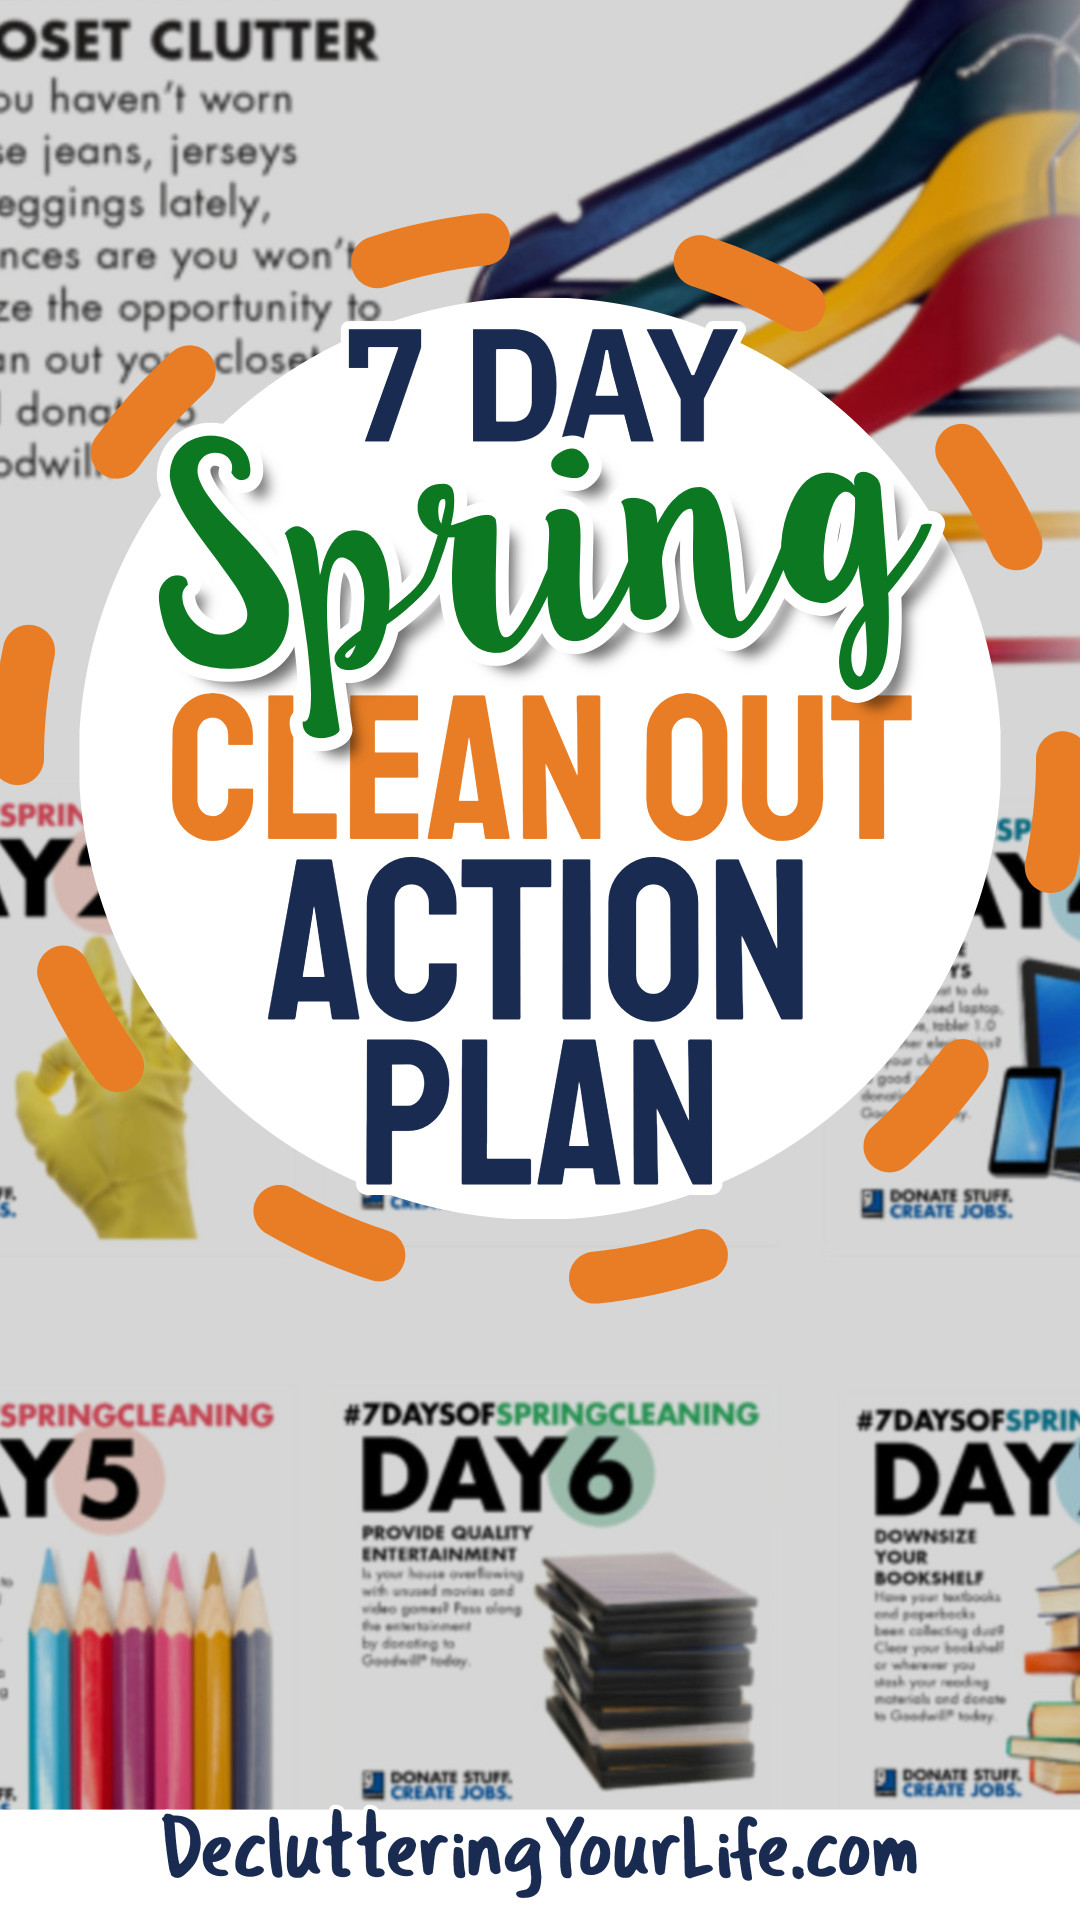 7 Day Spring Clean Out Action Plan